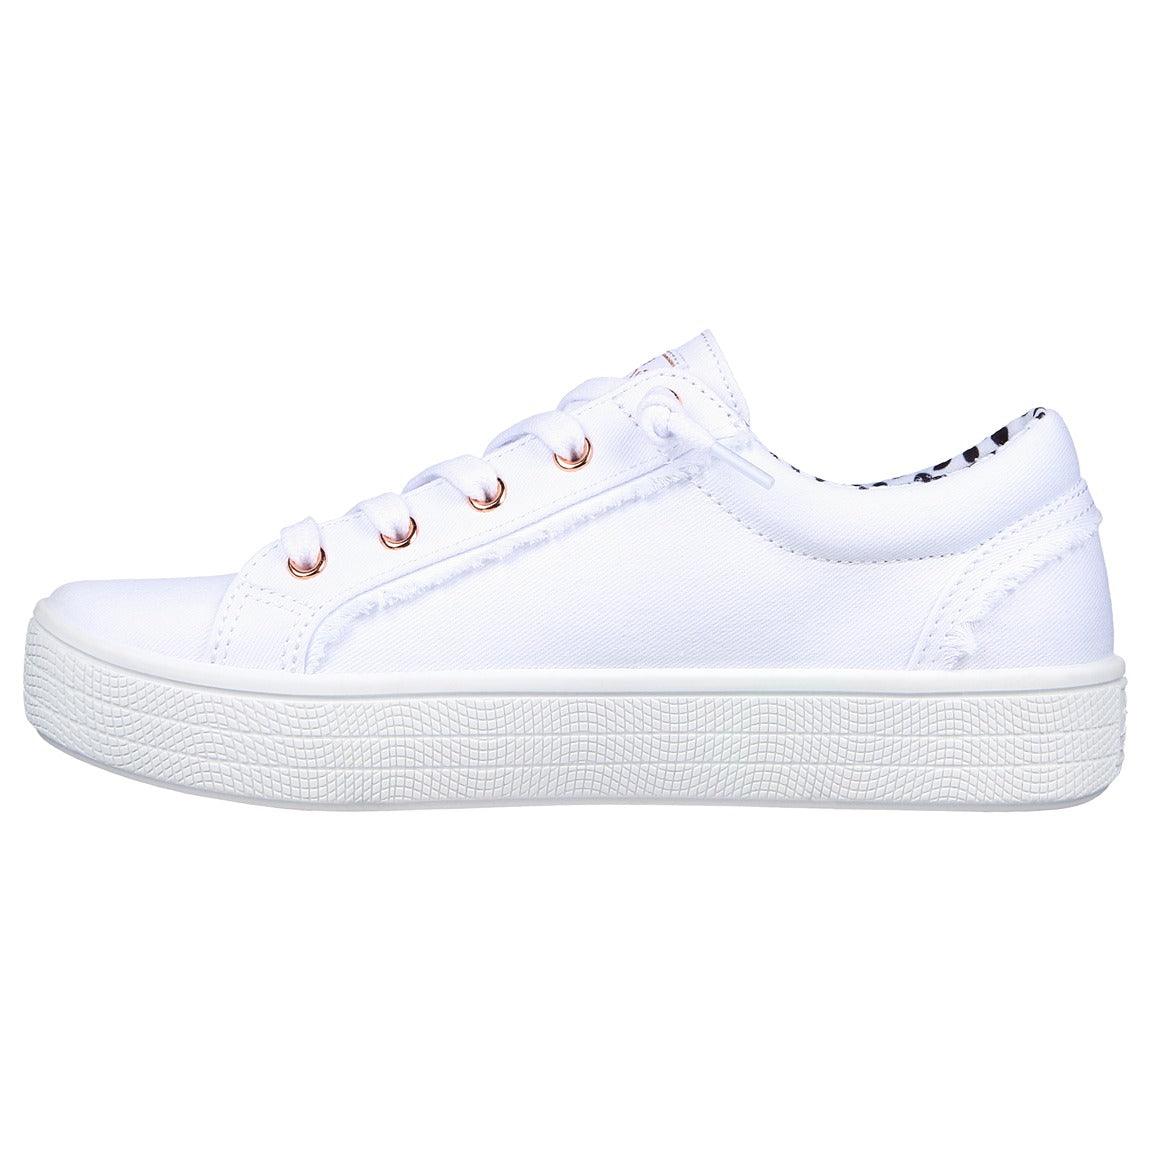 BOBS B Extra Cute Shoes - Women - Sports Excellence